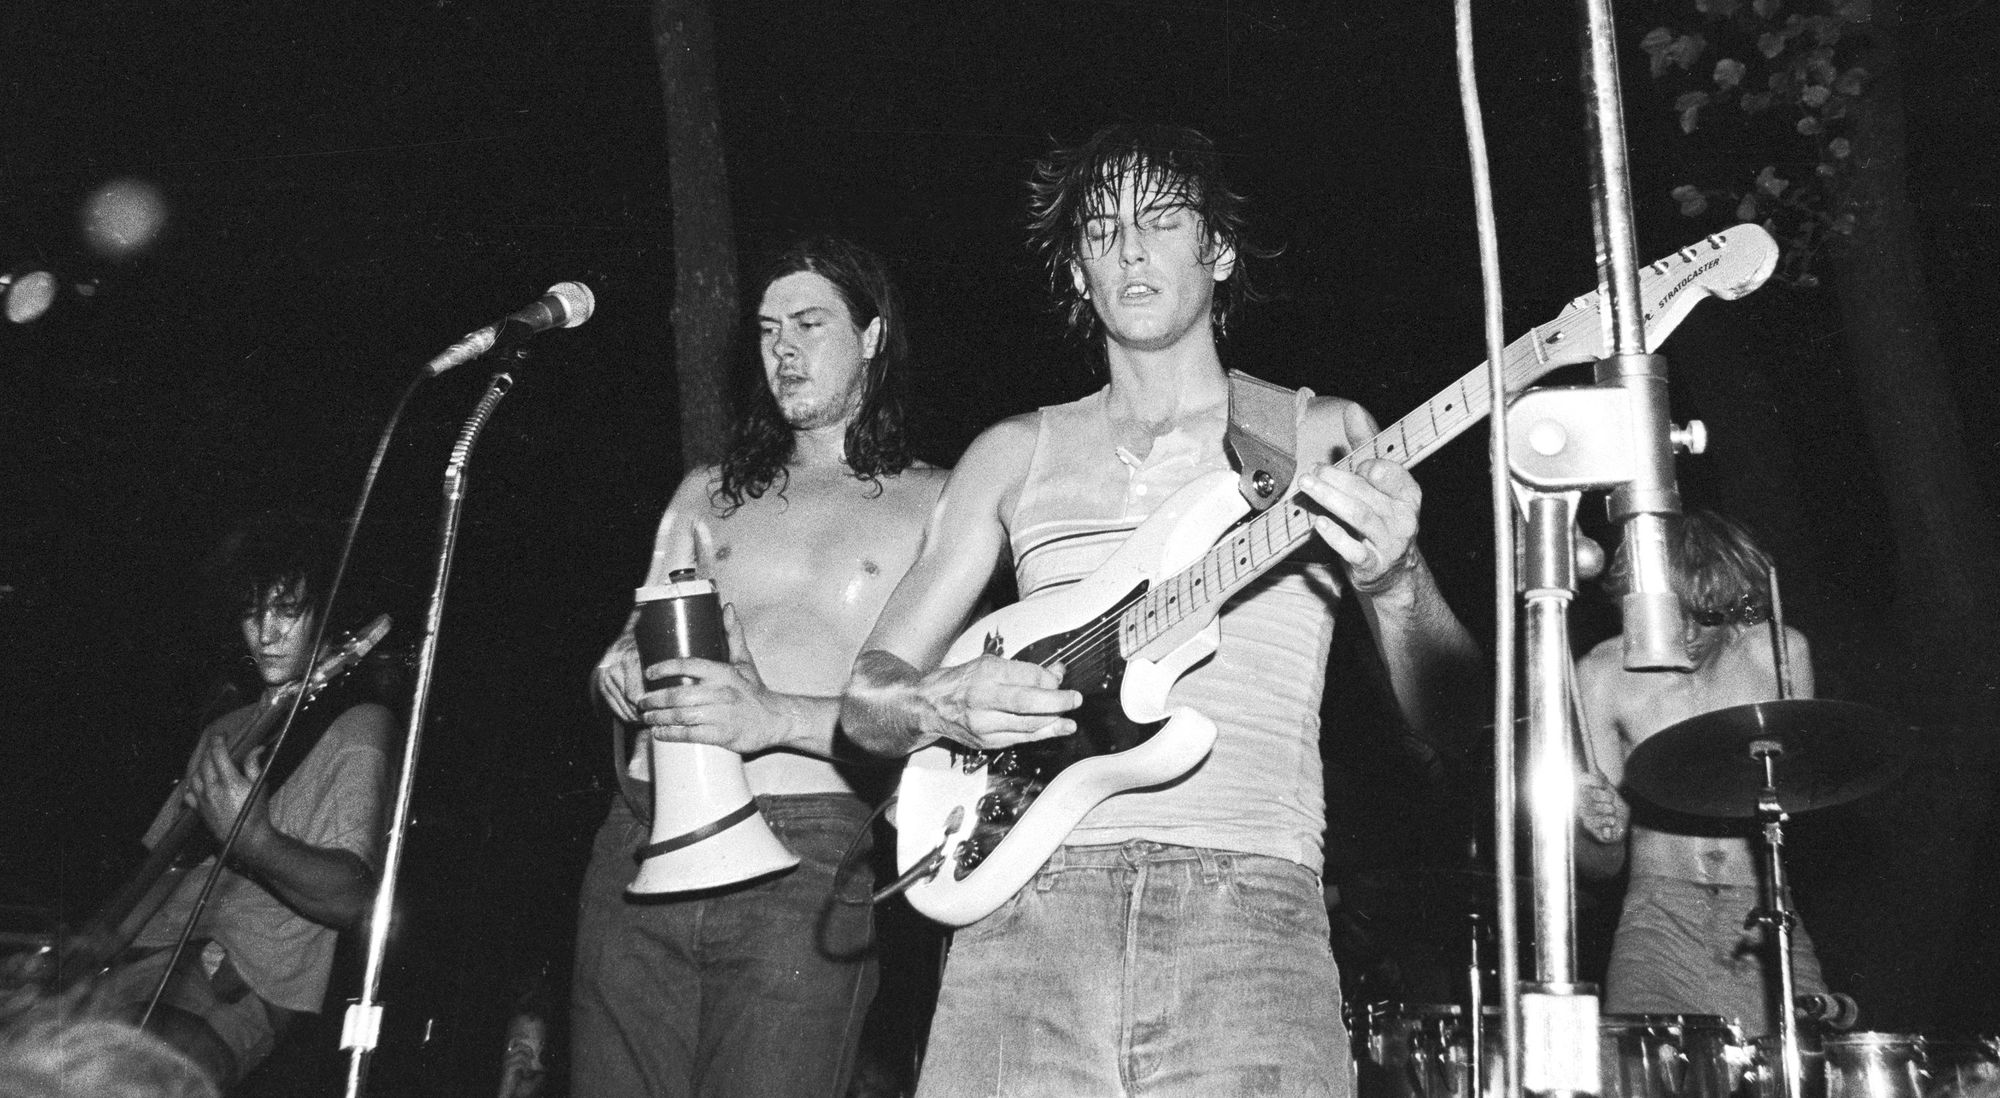 Butthole Surfers perform at Woodshock in Austin, Texas in 1986.